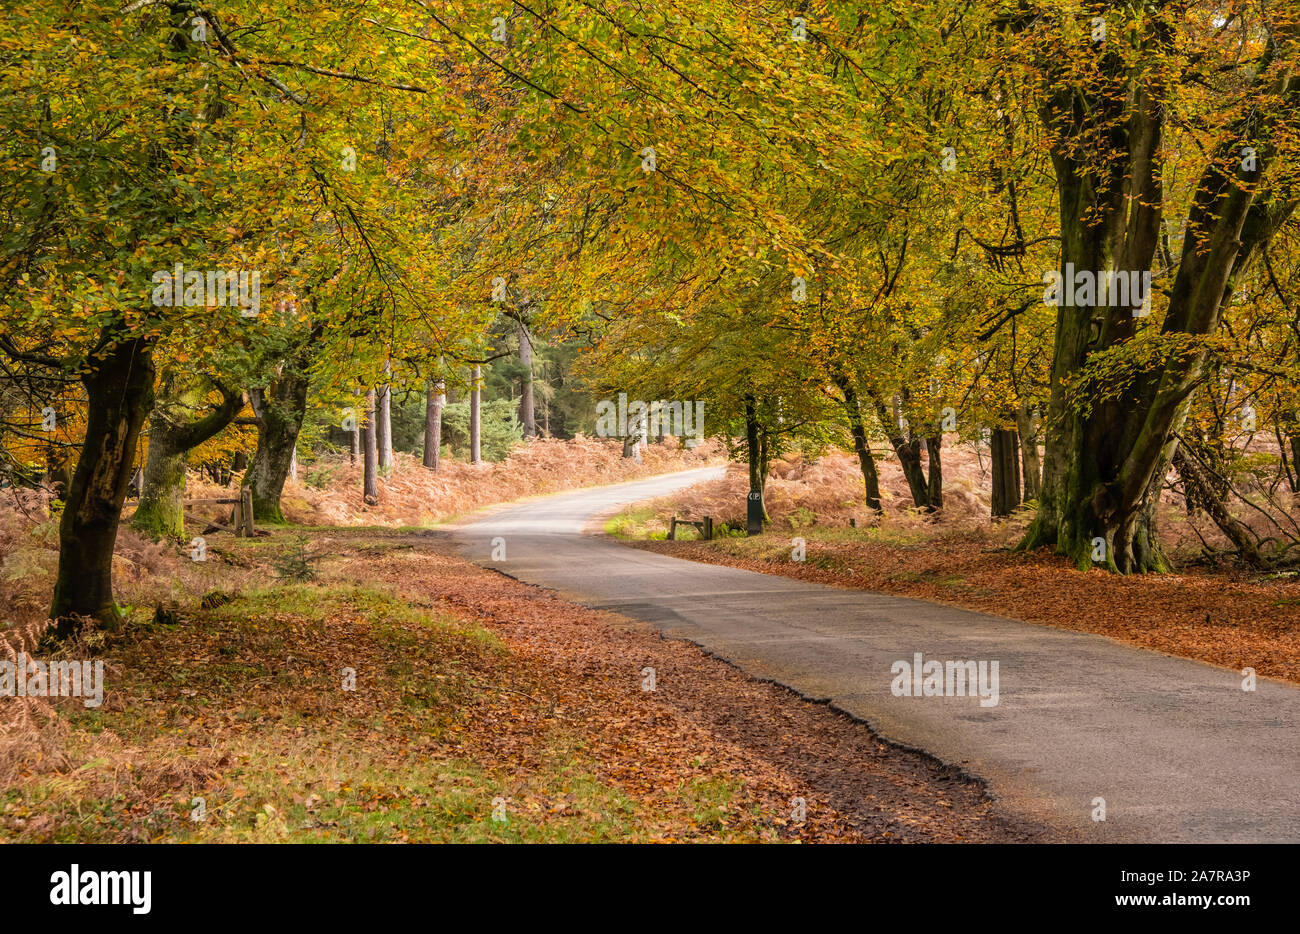 New Forest, Autumn Colour, Beech Trees, Ornamental Drive Road, Hampshire, England, UK. Stock Photo